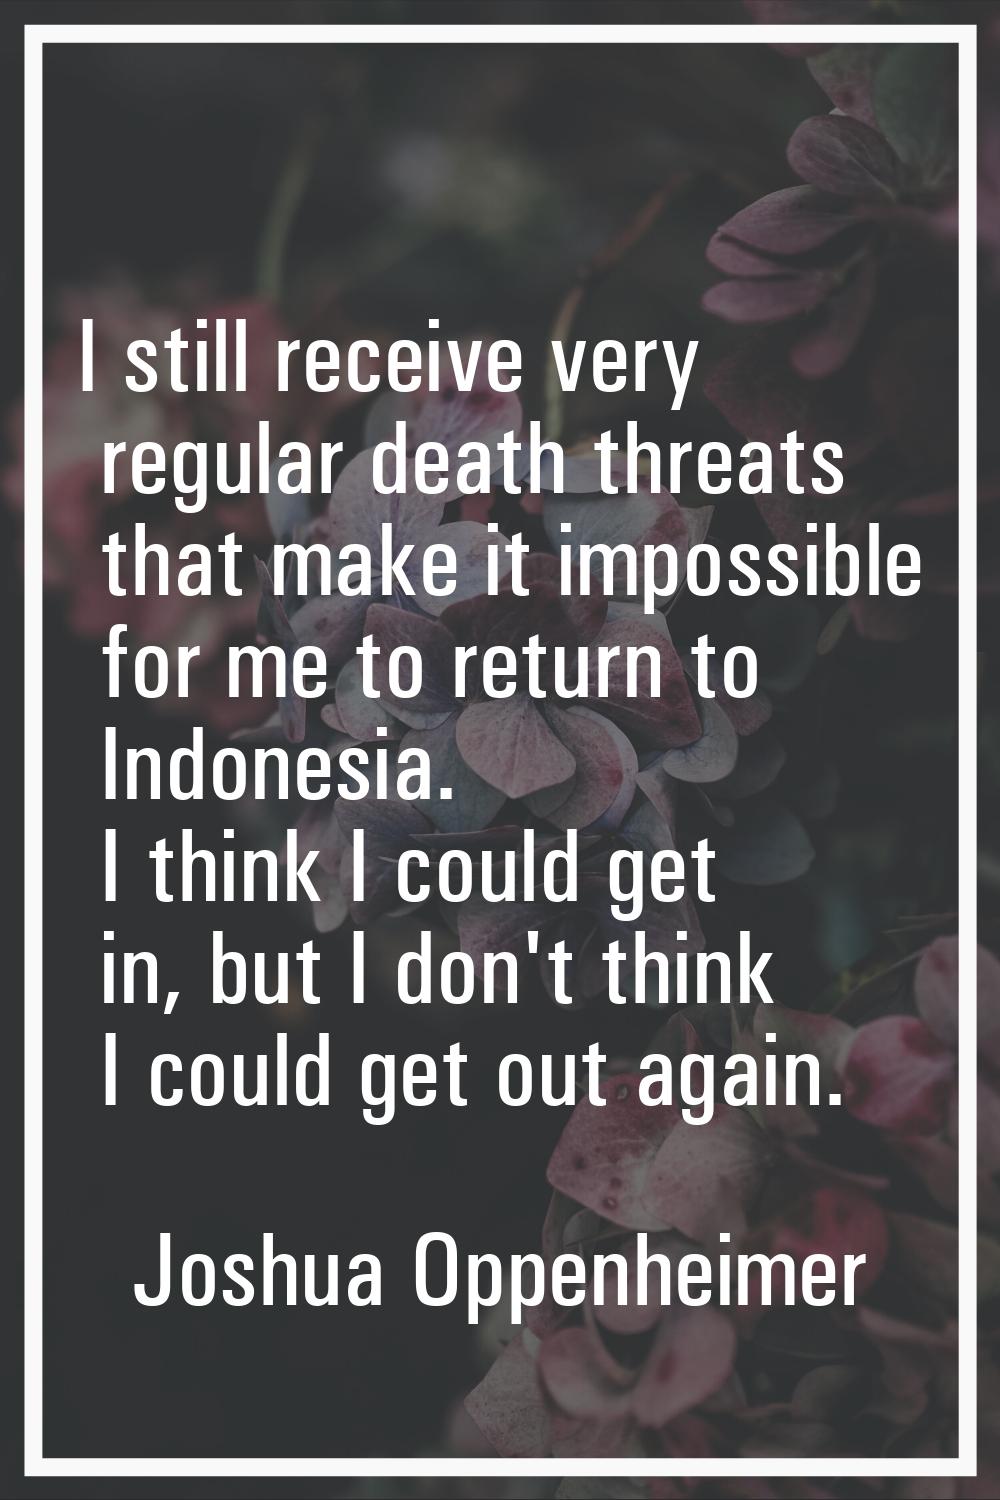 I still receive very regular death threats that make it impossible for me to return to Indonesia. I